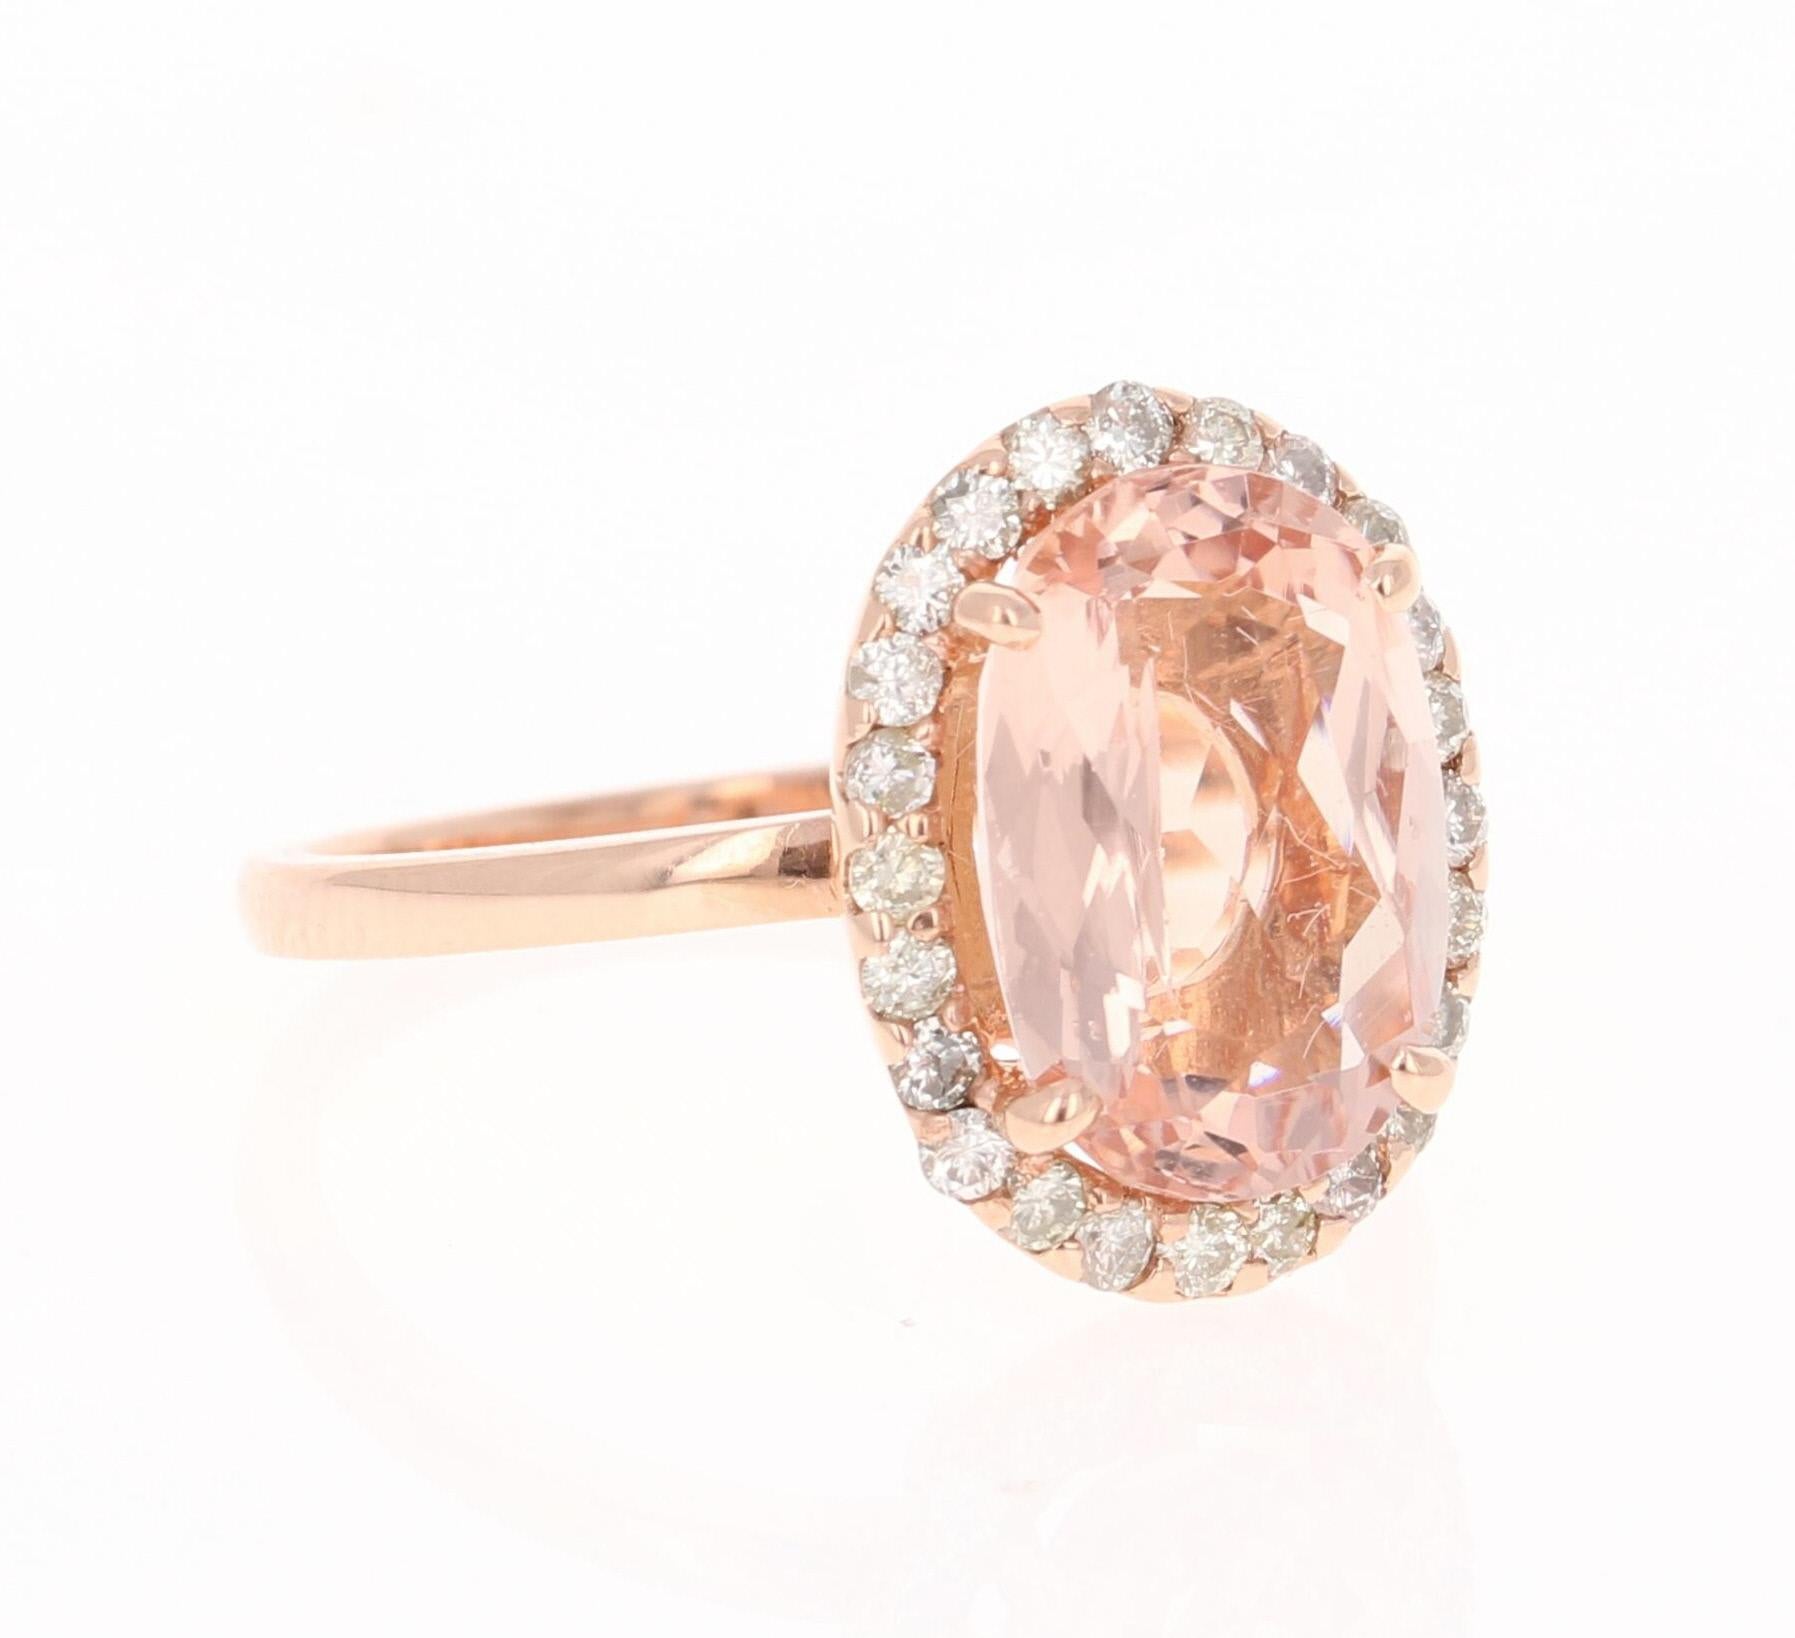 This Morganite ring has a beautiful 3.24 Carat Oval Cut Morganite and is surrounded by a simple halo of  24 Round Cut Diamonds that weigh 0.39 Carats.  The diamonds have a clarity and color of SI-F. The total carat weight of the ring is 3.63 Carats.